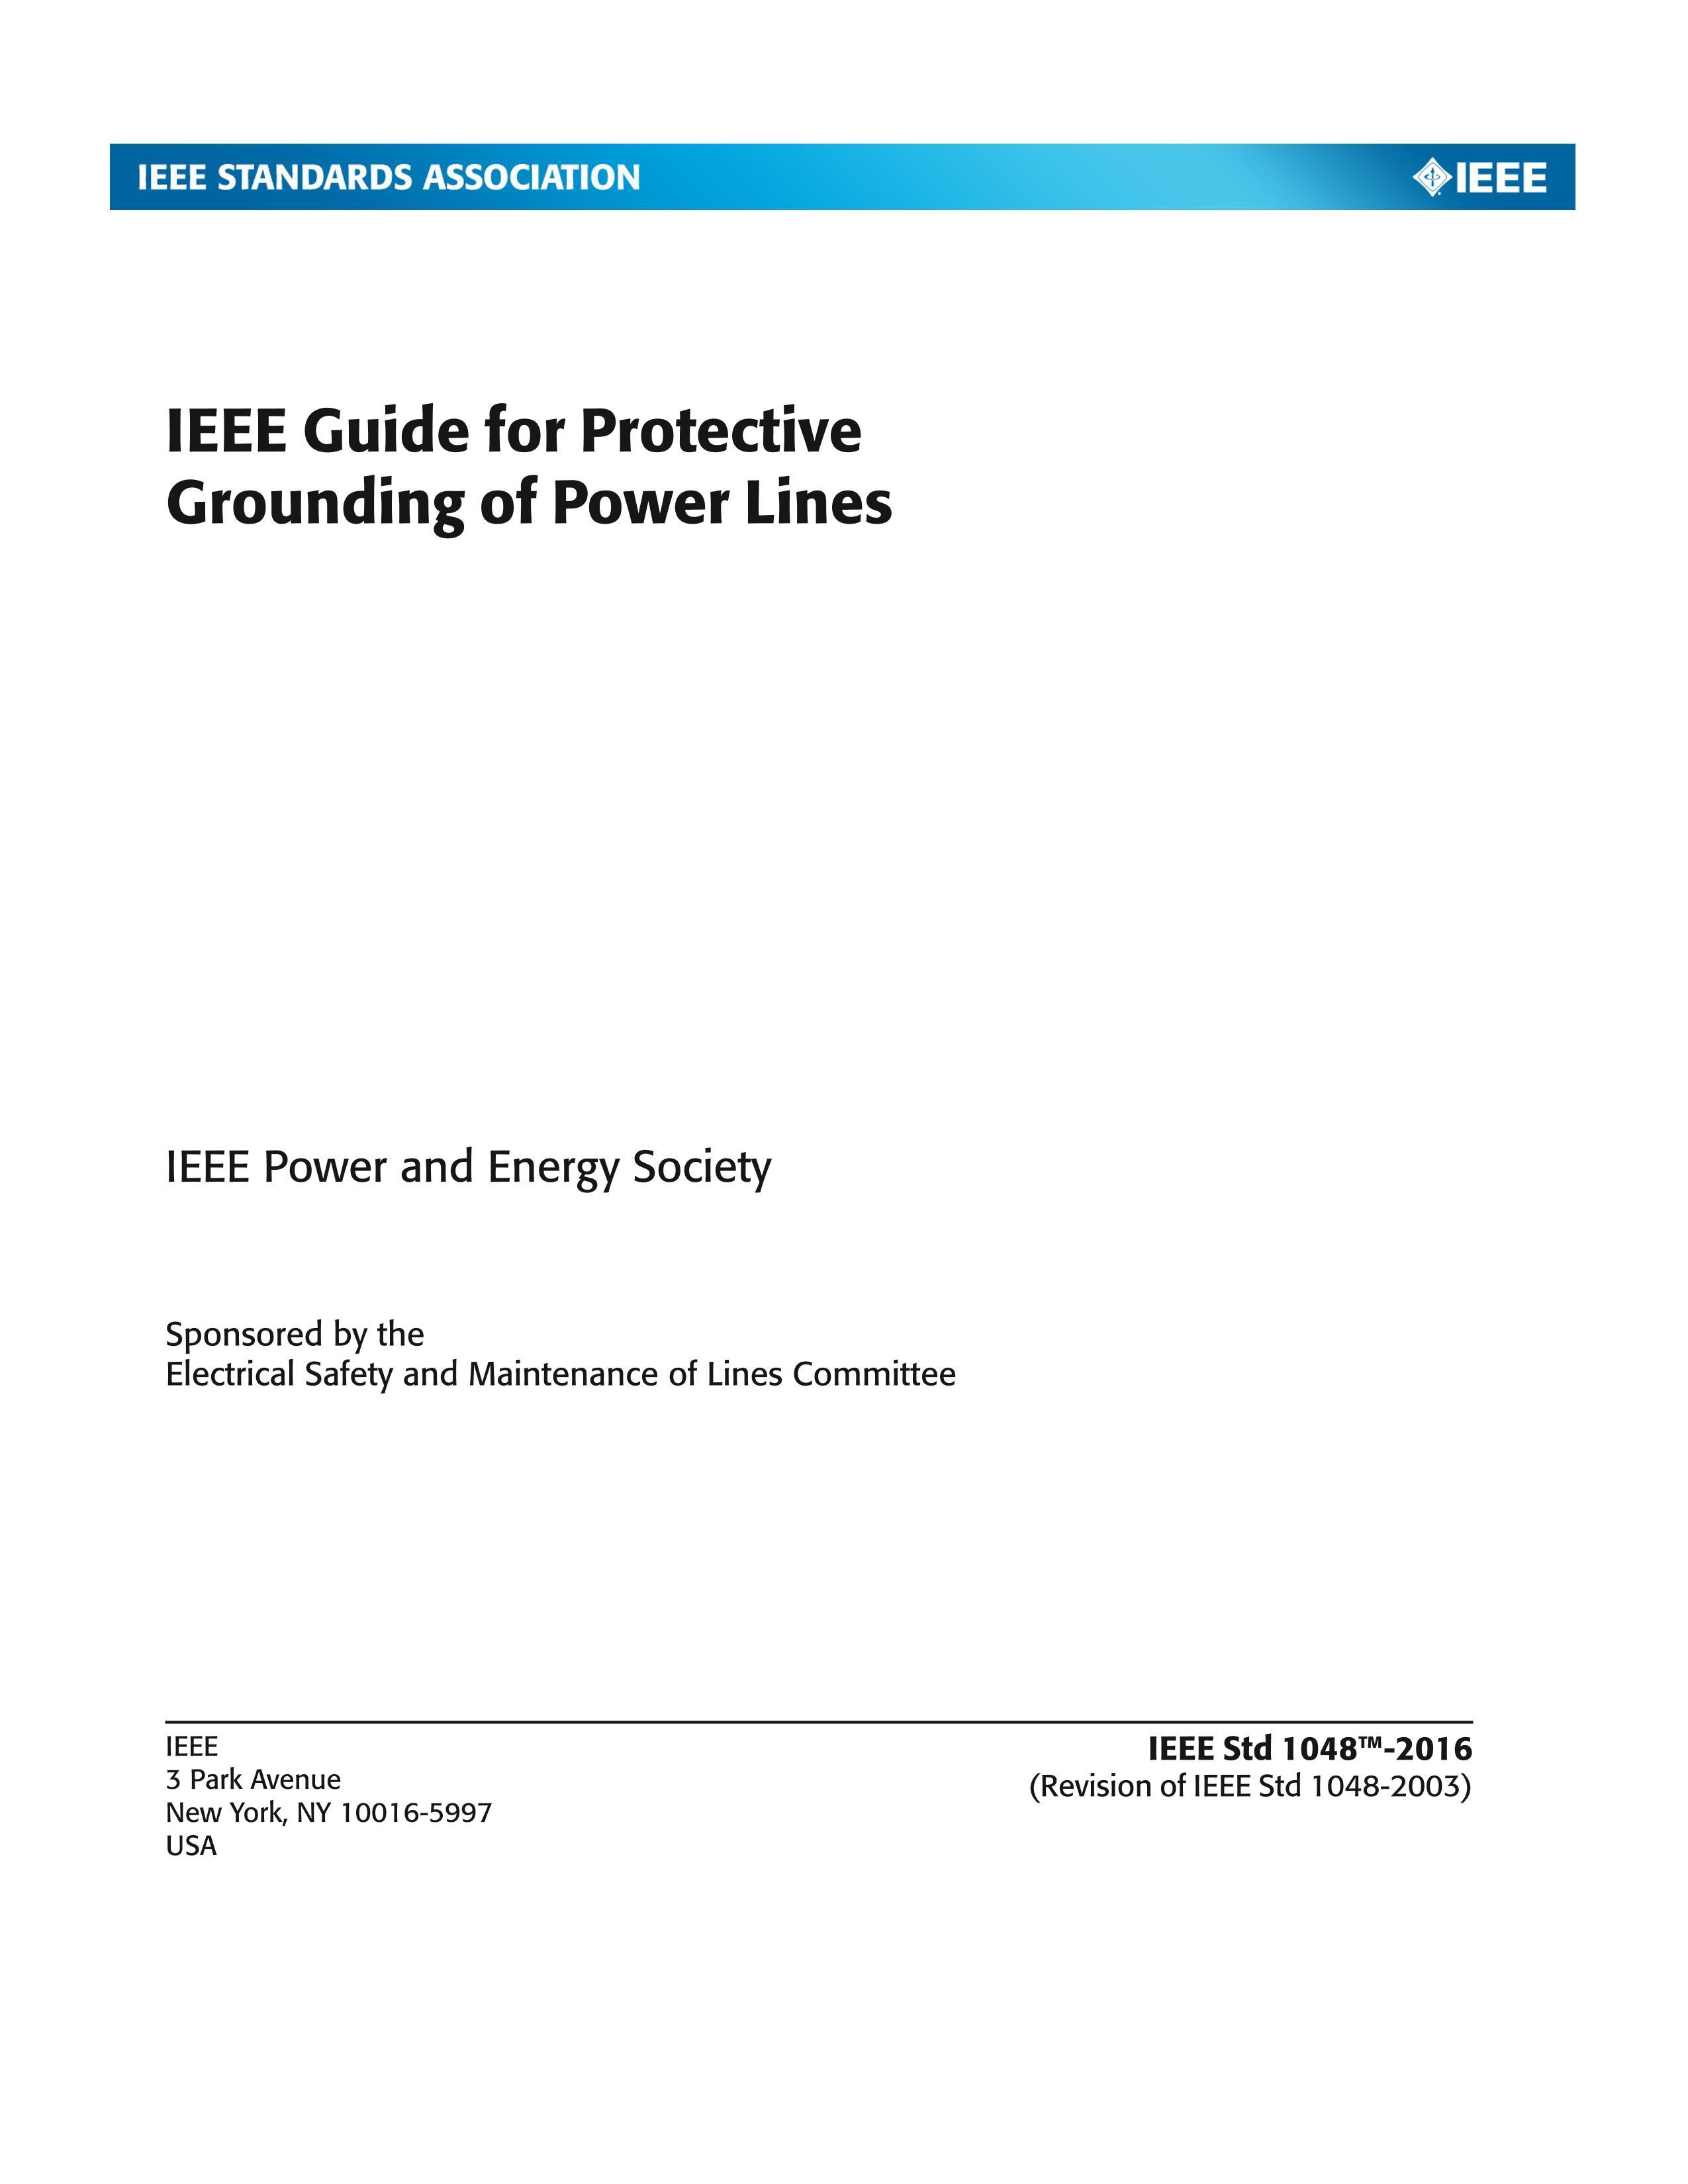 IEEE Std 1048-2016 IEEE Guide for Protective Grounding of Power Lines.PDF1ҳ